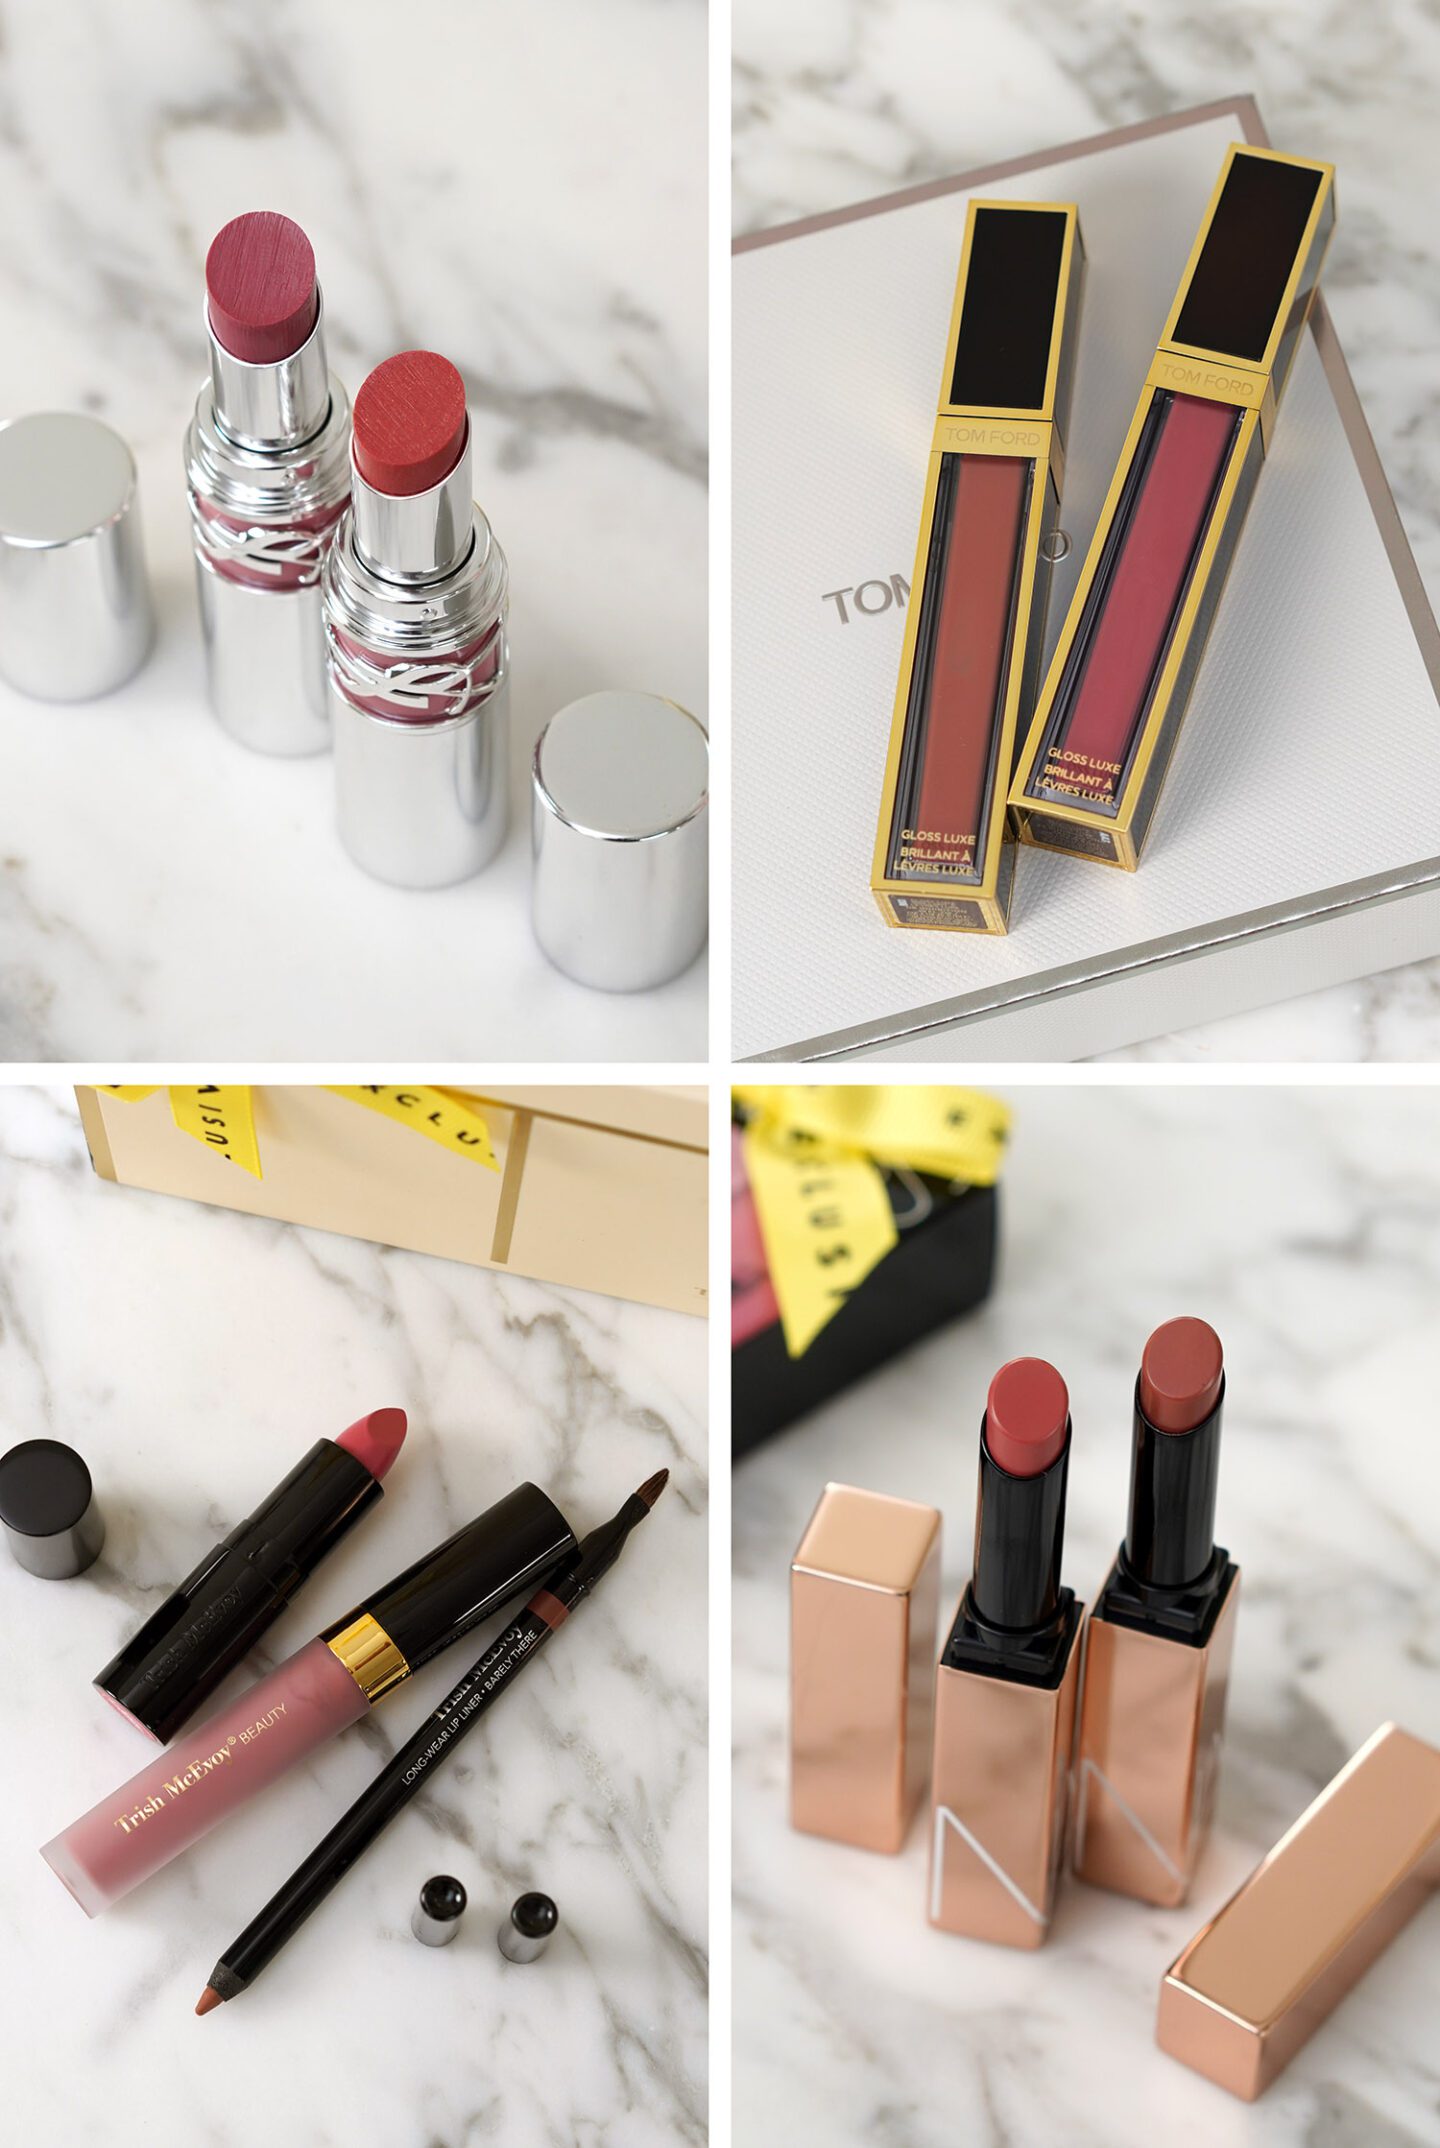 Nordstrom Anniversary Sale Beauty Exclusive Lip Sets: YSL, Tom Ford, Trish McEvoy and NARS